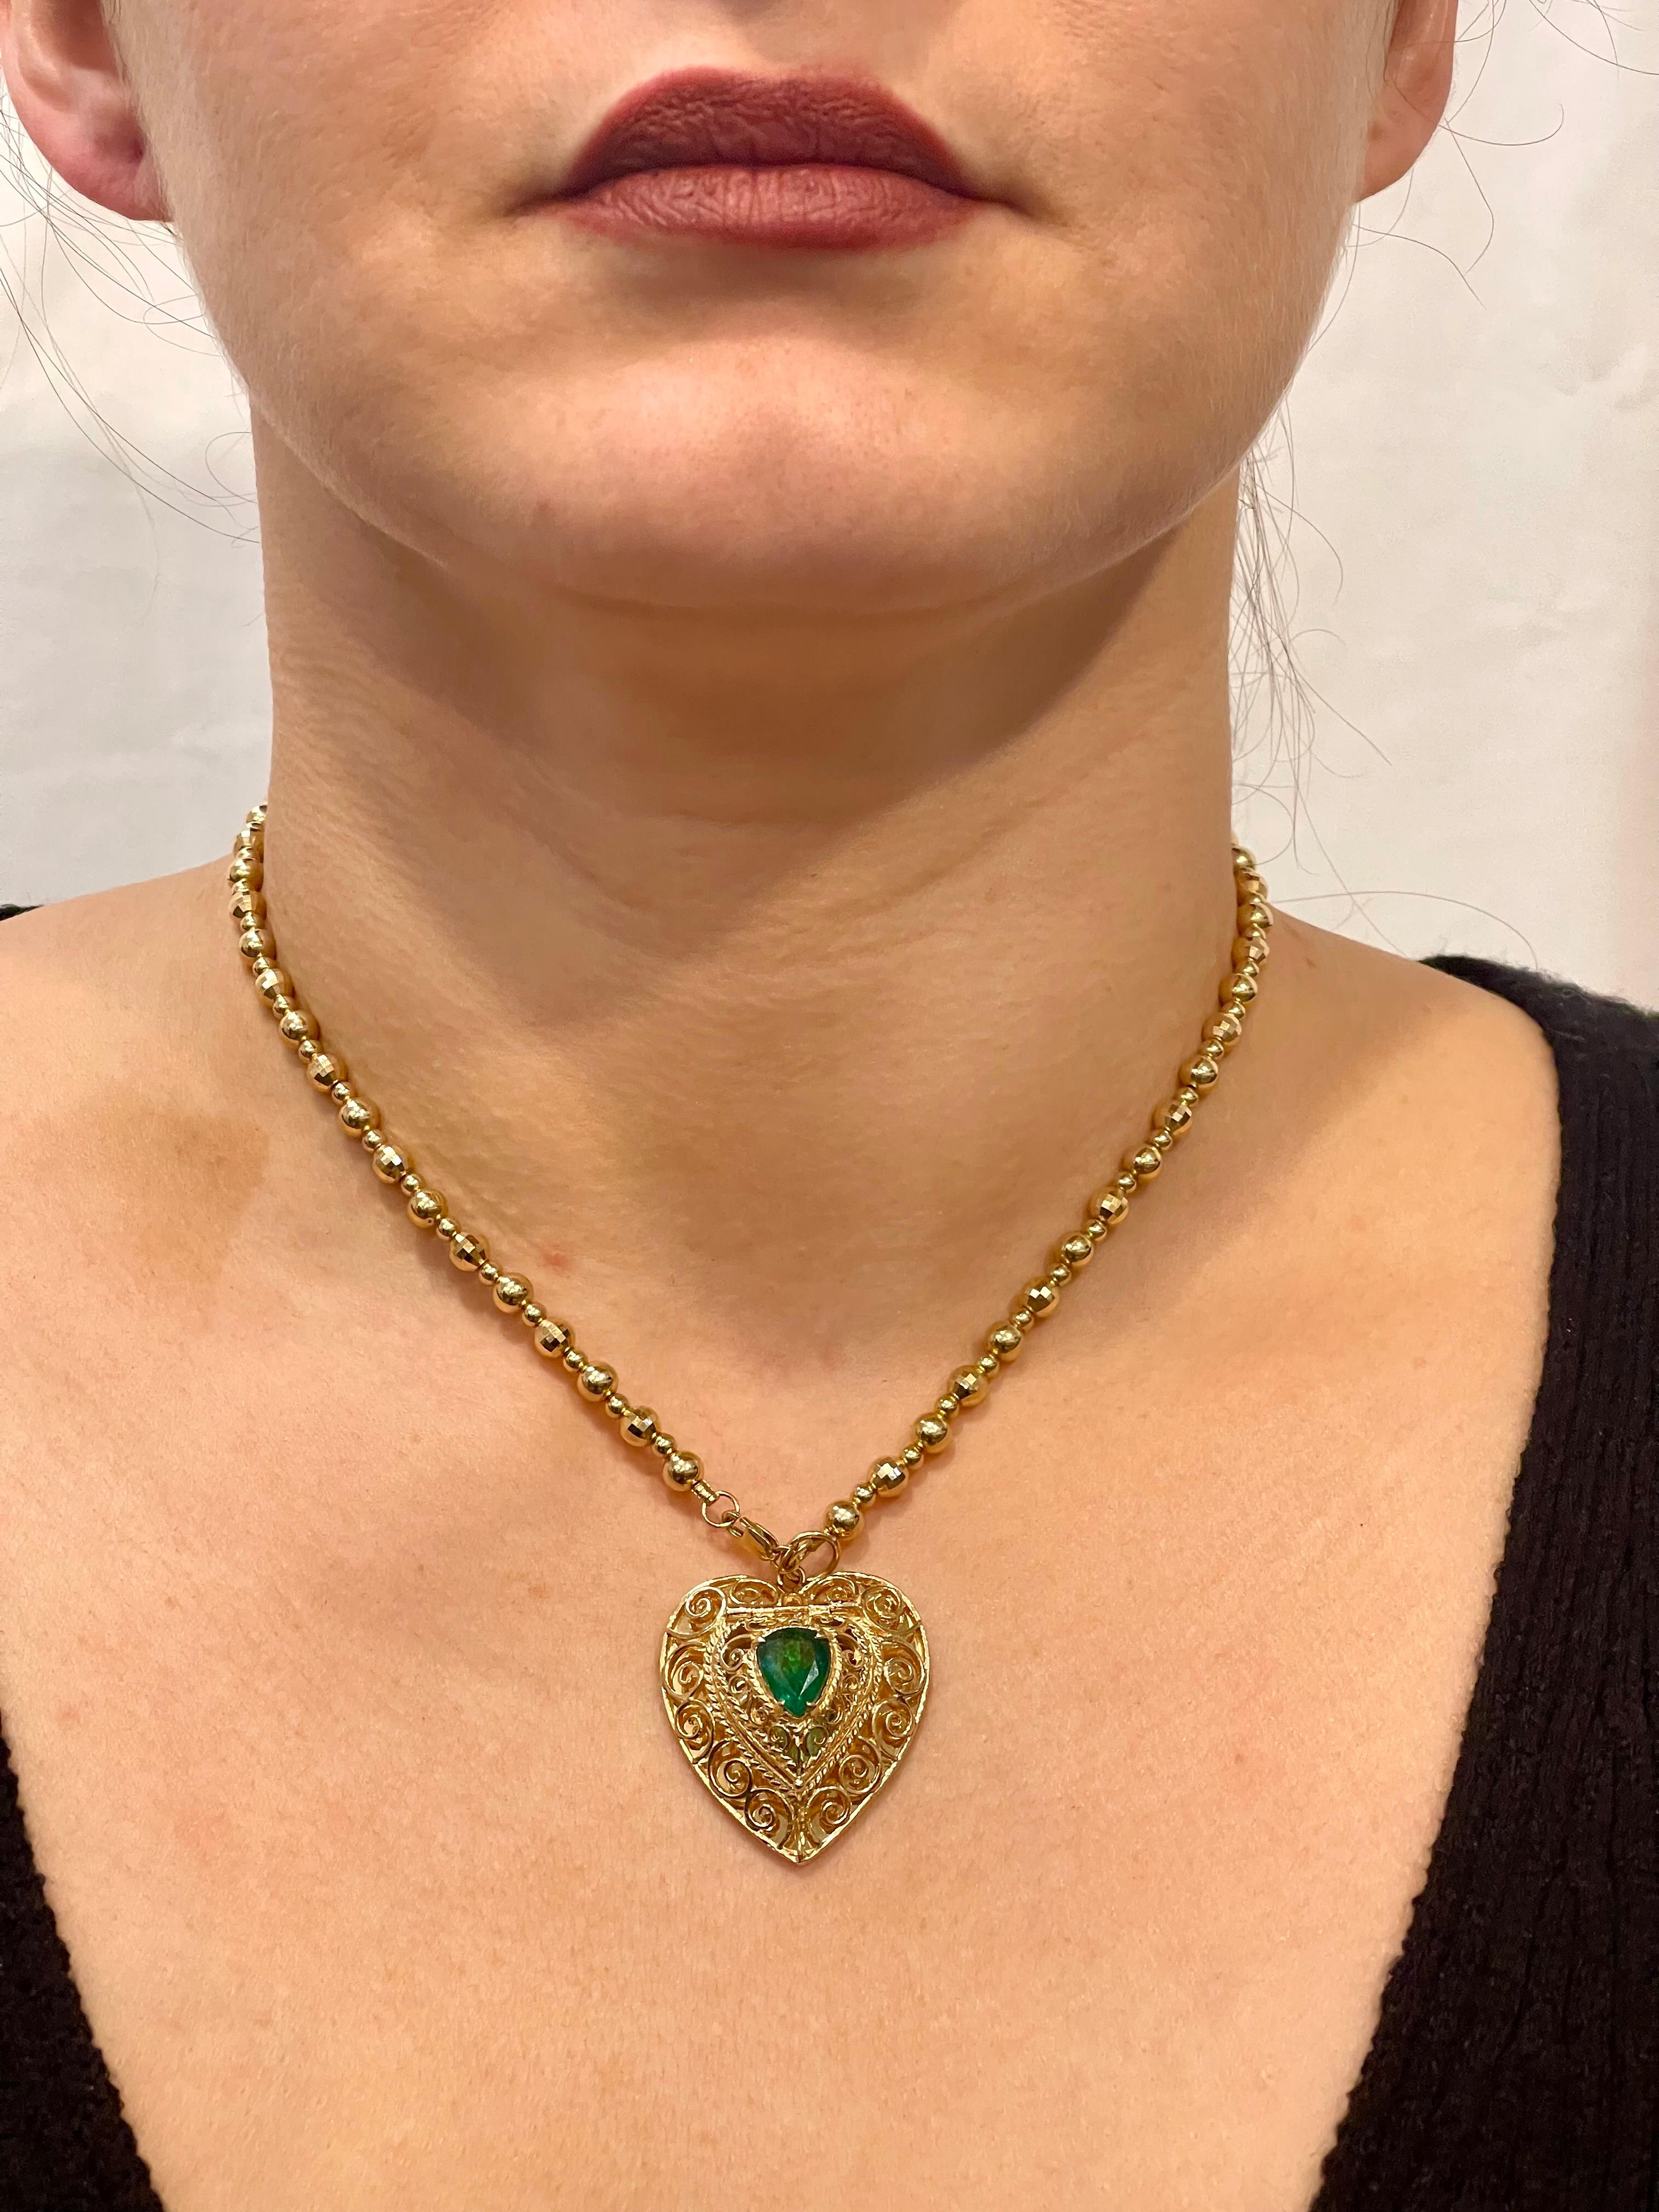 Vintage 14 Karat Yellow Gold  Heart Locket and Natural Emerald
Heart Locket is 12 inch wide and 1.3 Inch long 
CHAIN IS NOT AVAILABLE 
Natural Brazilian Emerald , Pear shape , approximately 2.5 ct
Locket open where you can save medicine or